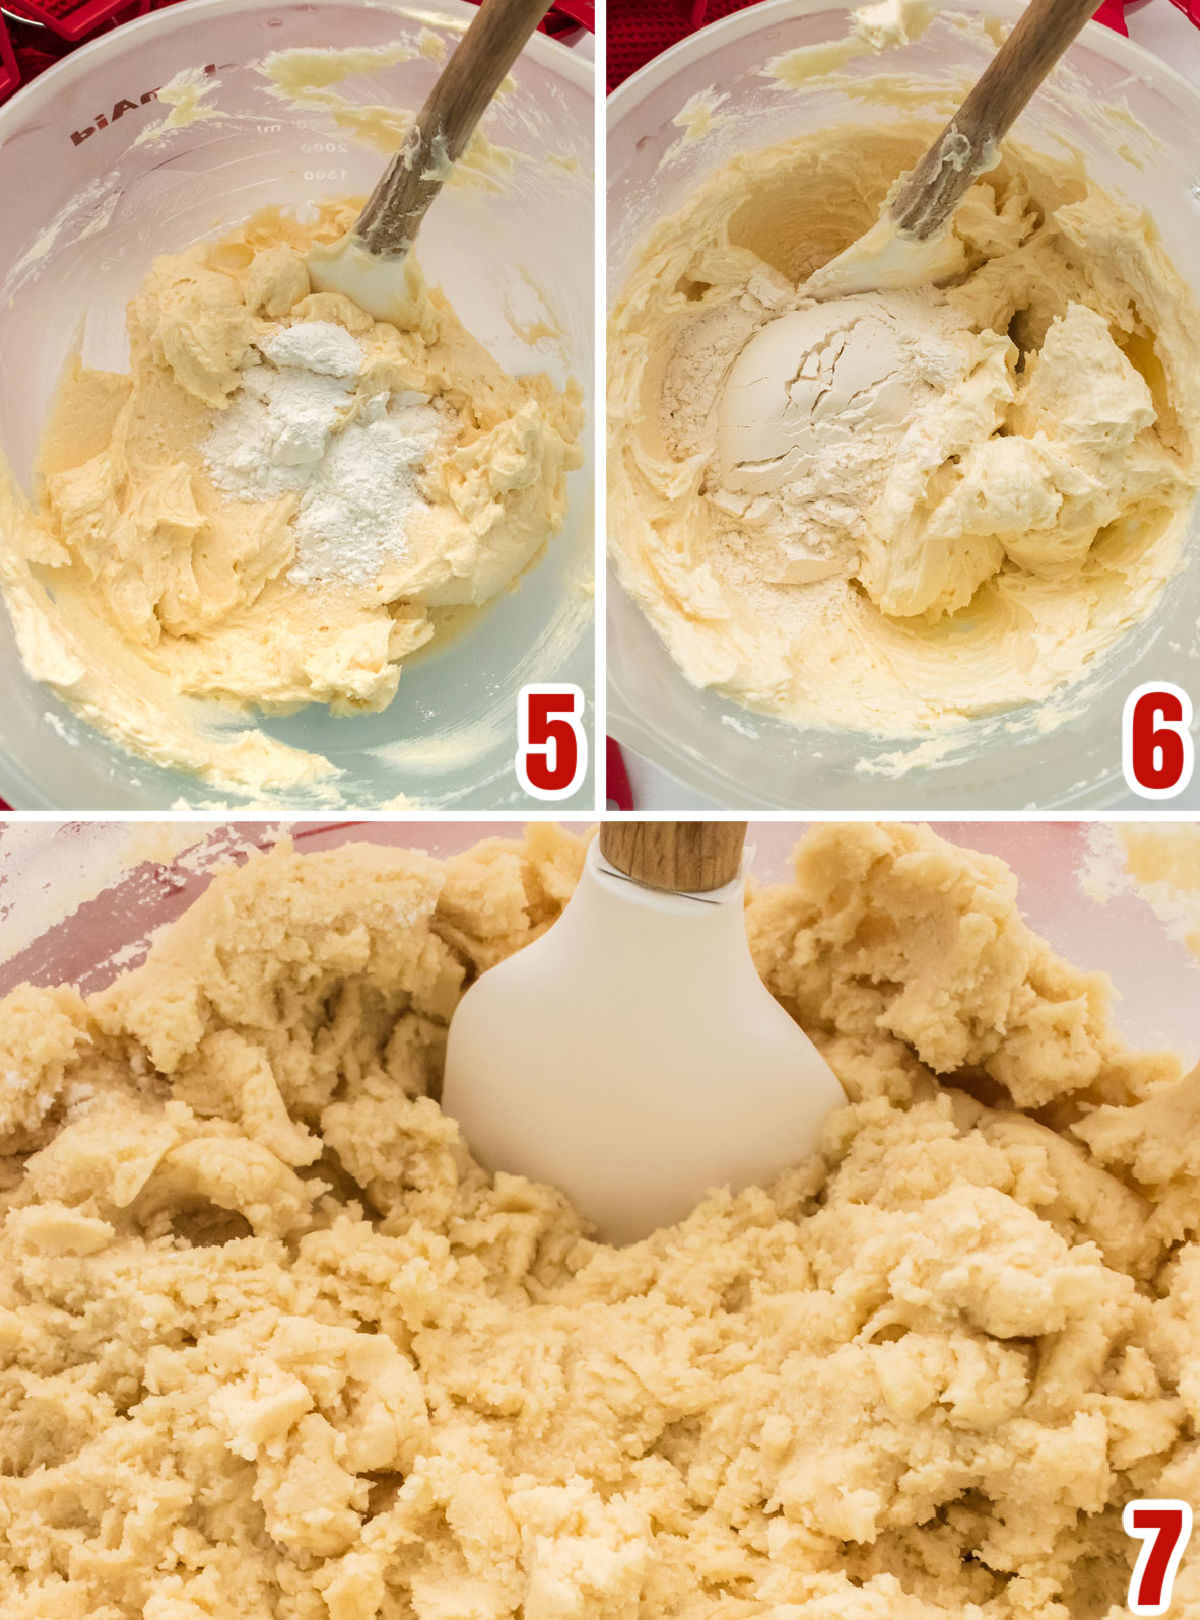 Collage image showing the steps for adding the dry ingredients to the Sugar Cookie dough.